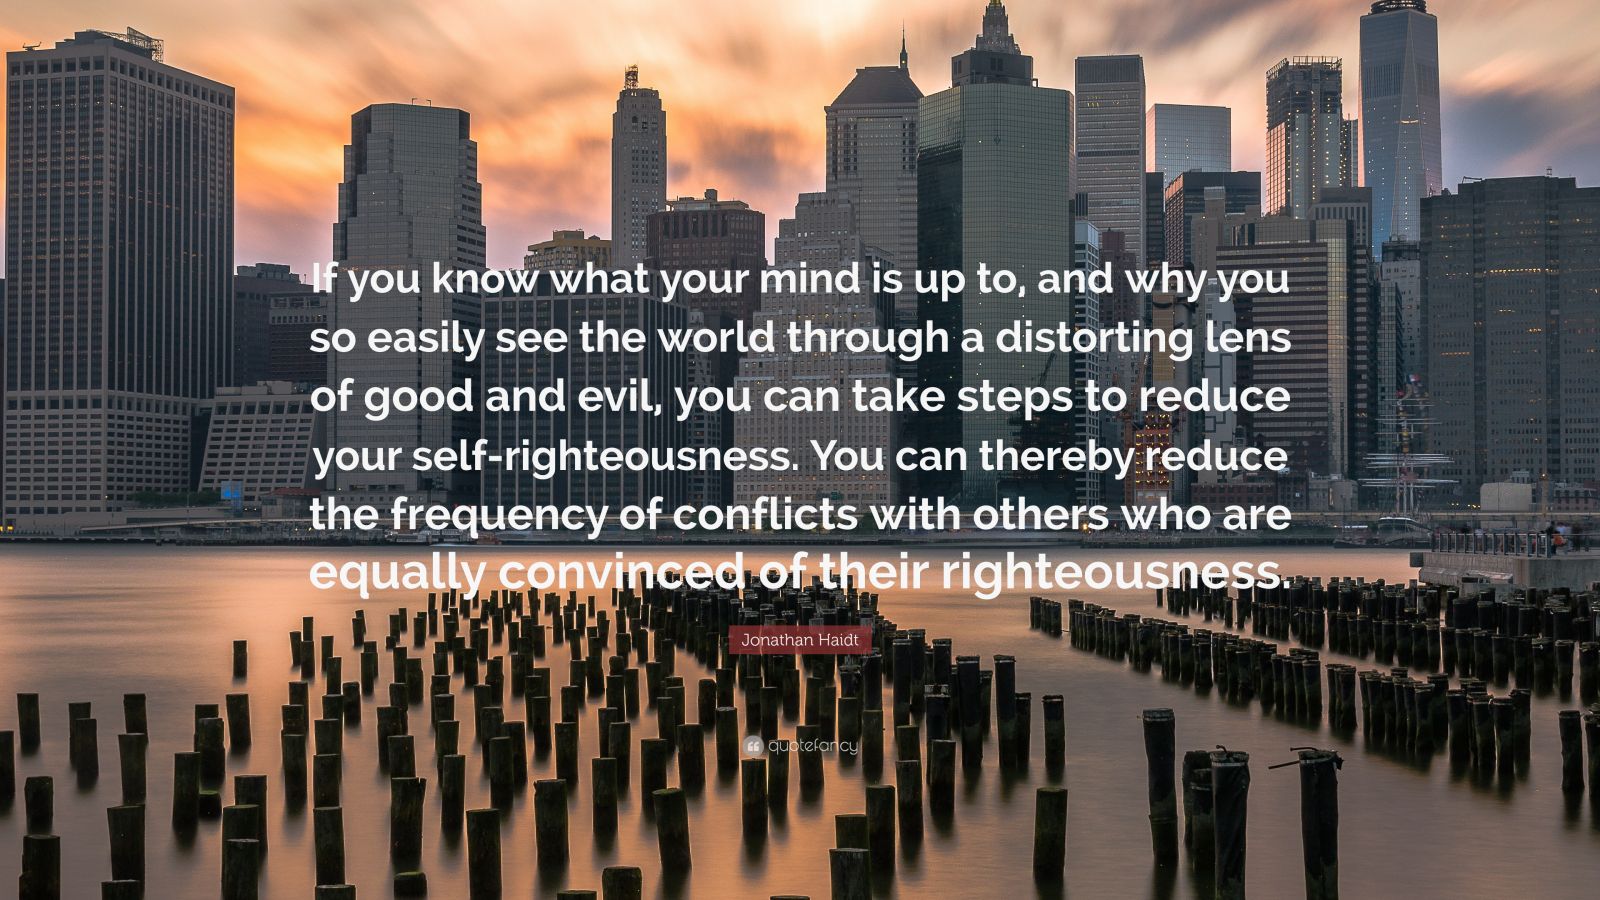 Jonathan Haidt Quote: “If you know what your mind is up to, and why you ...